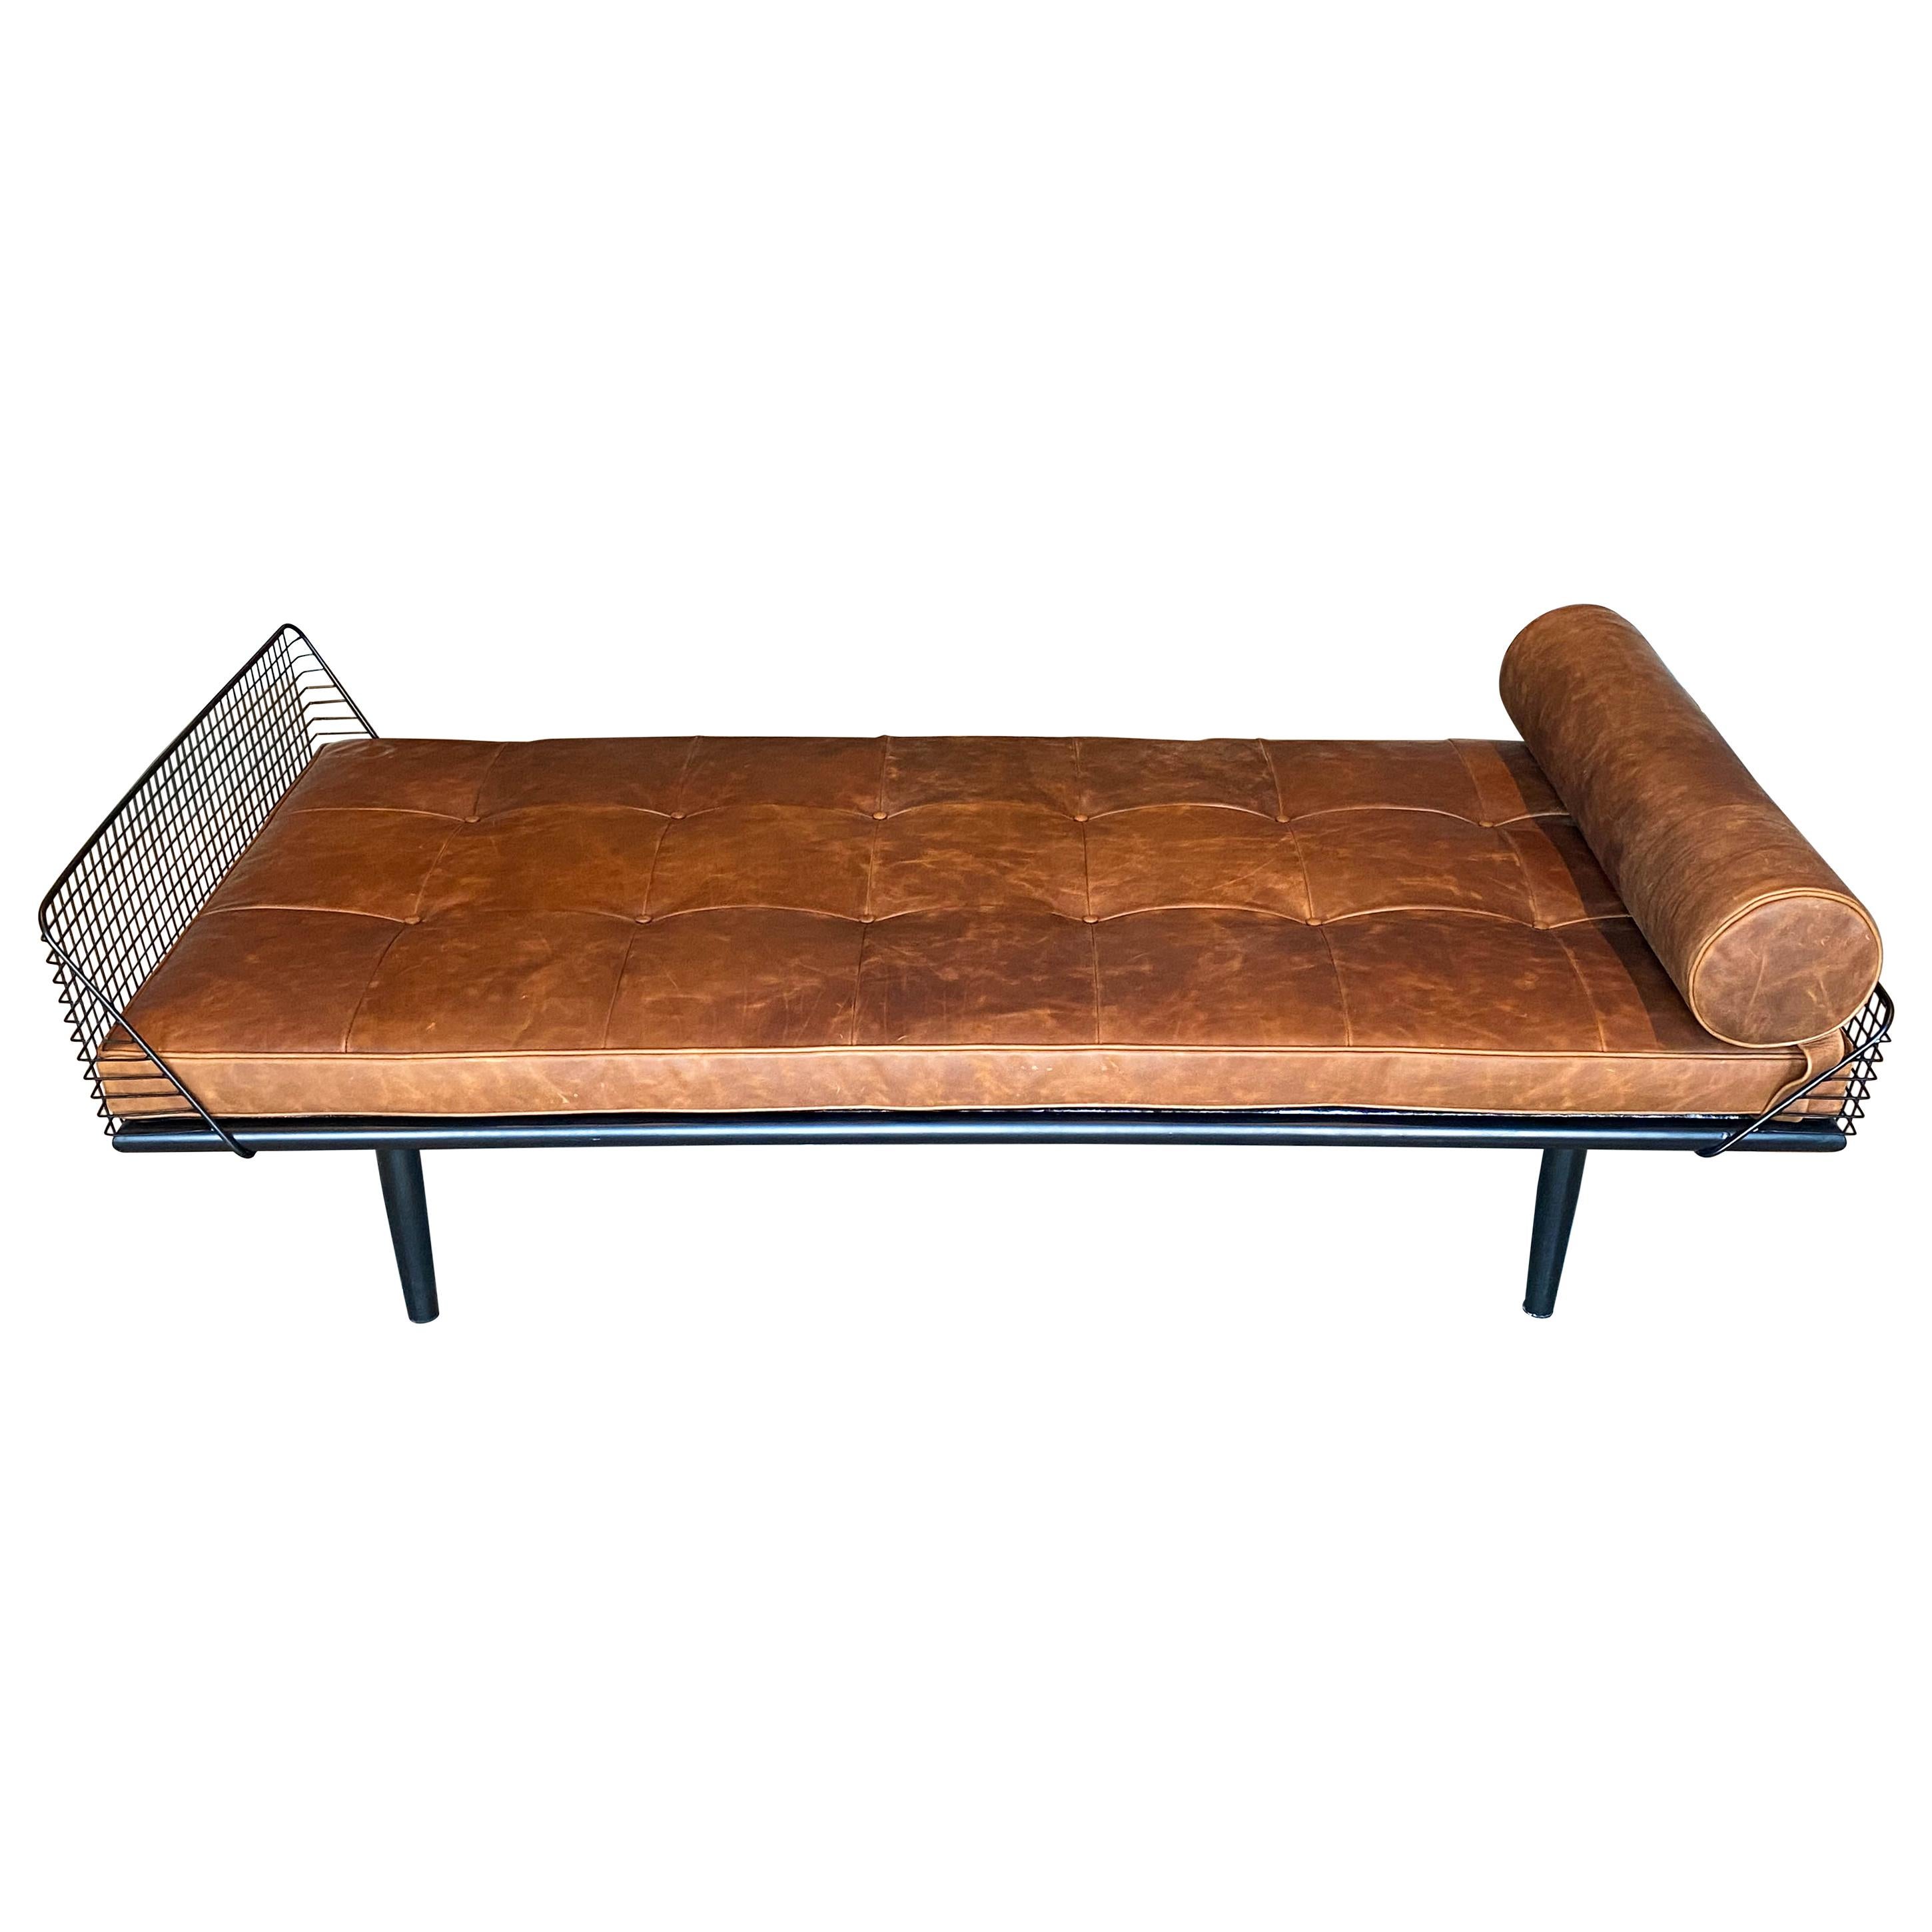 Studio Osklo Daybed 1 in Blackened Steel with Aged Leather Cushion and Bolster